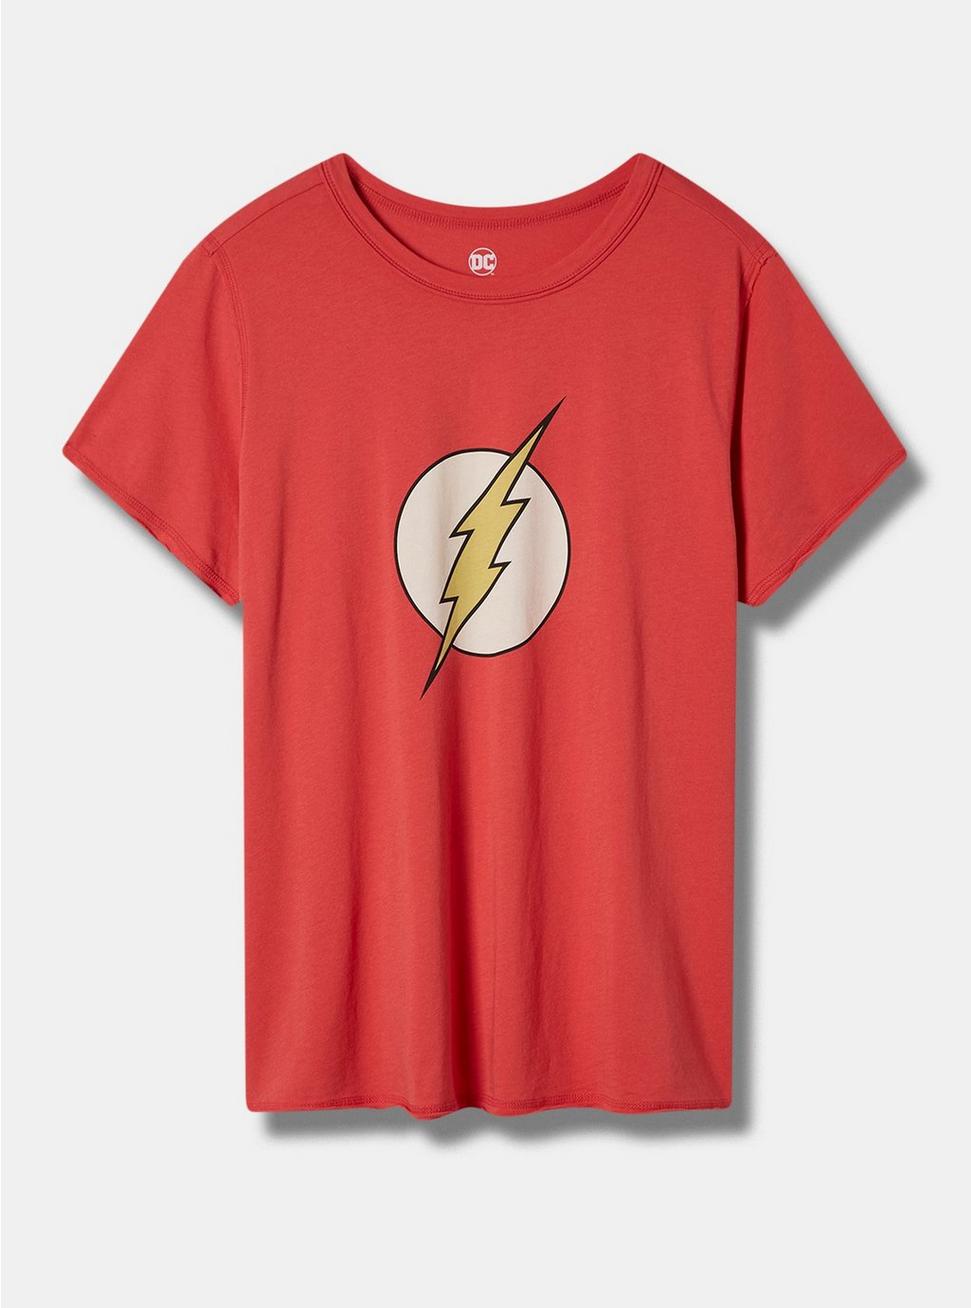 Plus Size Warner Bros The Flash Classic Fit Crew Neck Top, RED, hi-res